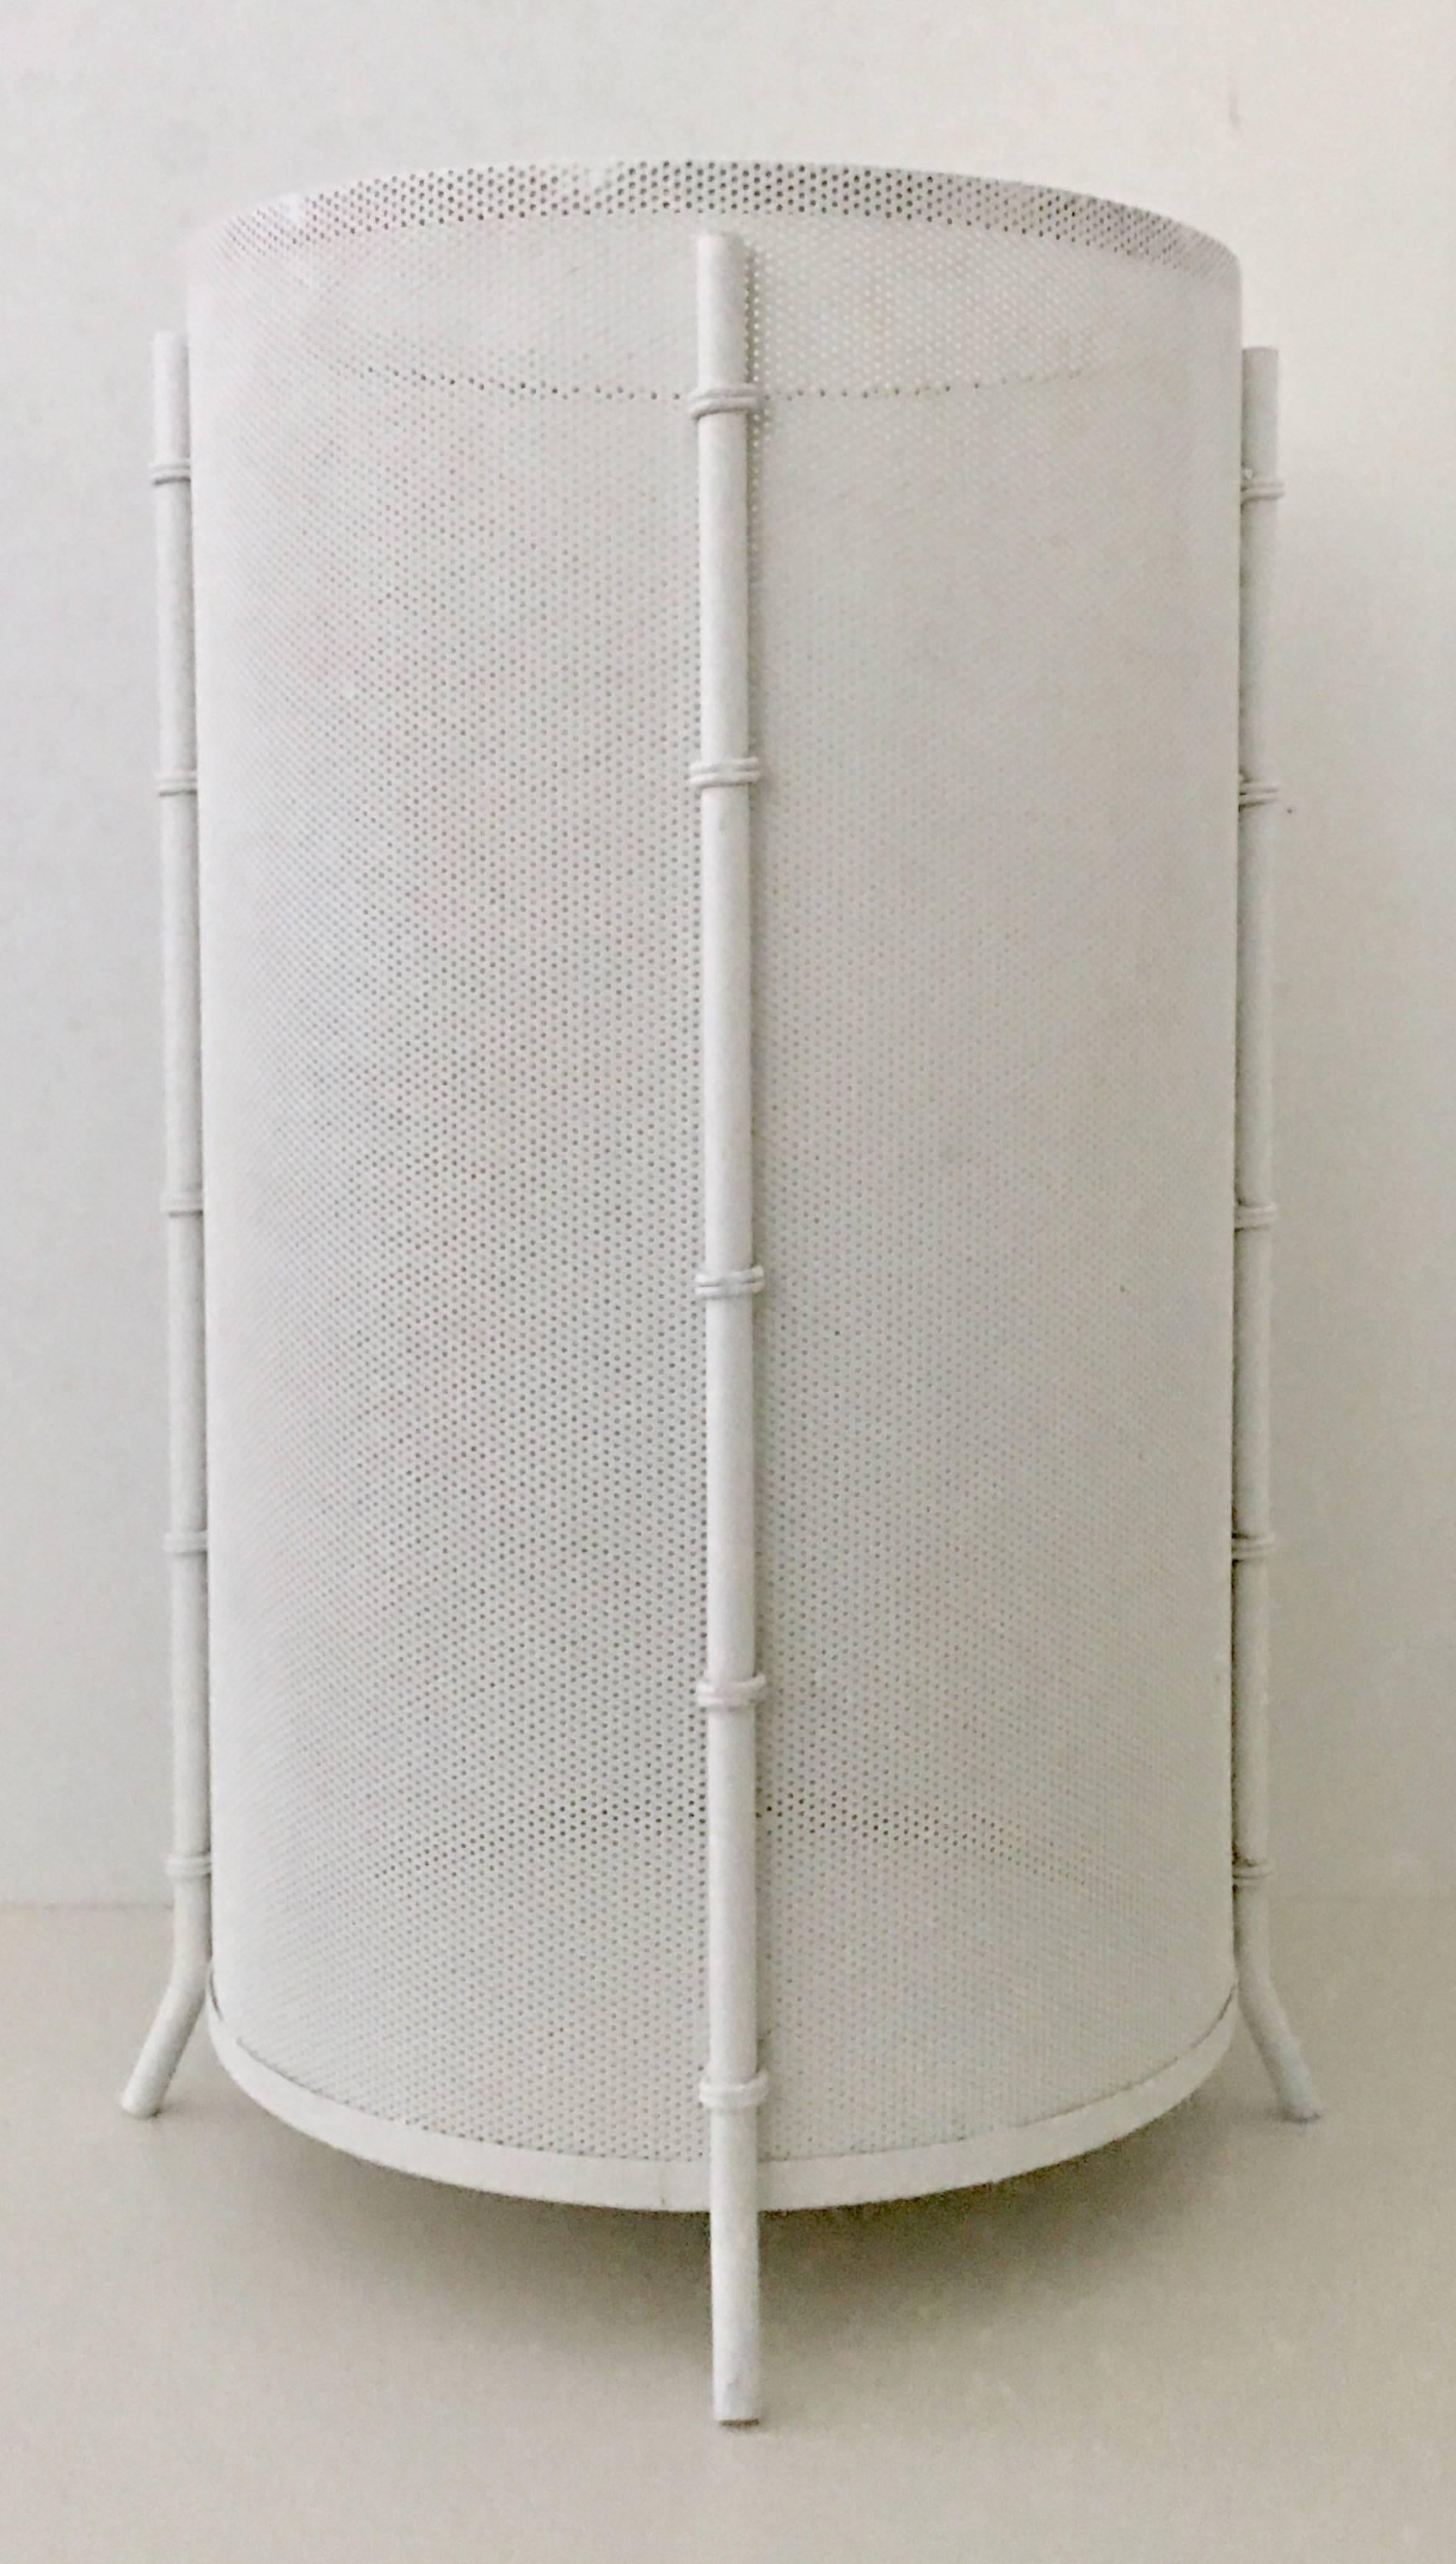 Extremely rare Mid-Century metal mesh umbrella stand with faux bamboo detail and legs. Designed by Mathieu Matégot - France. Painted white perforated wrought iron, metal mesh.